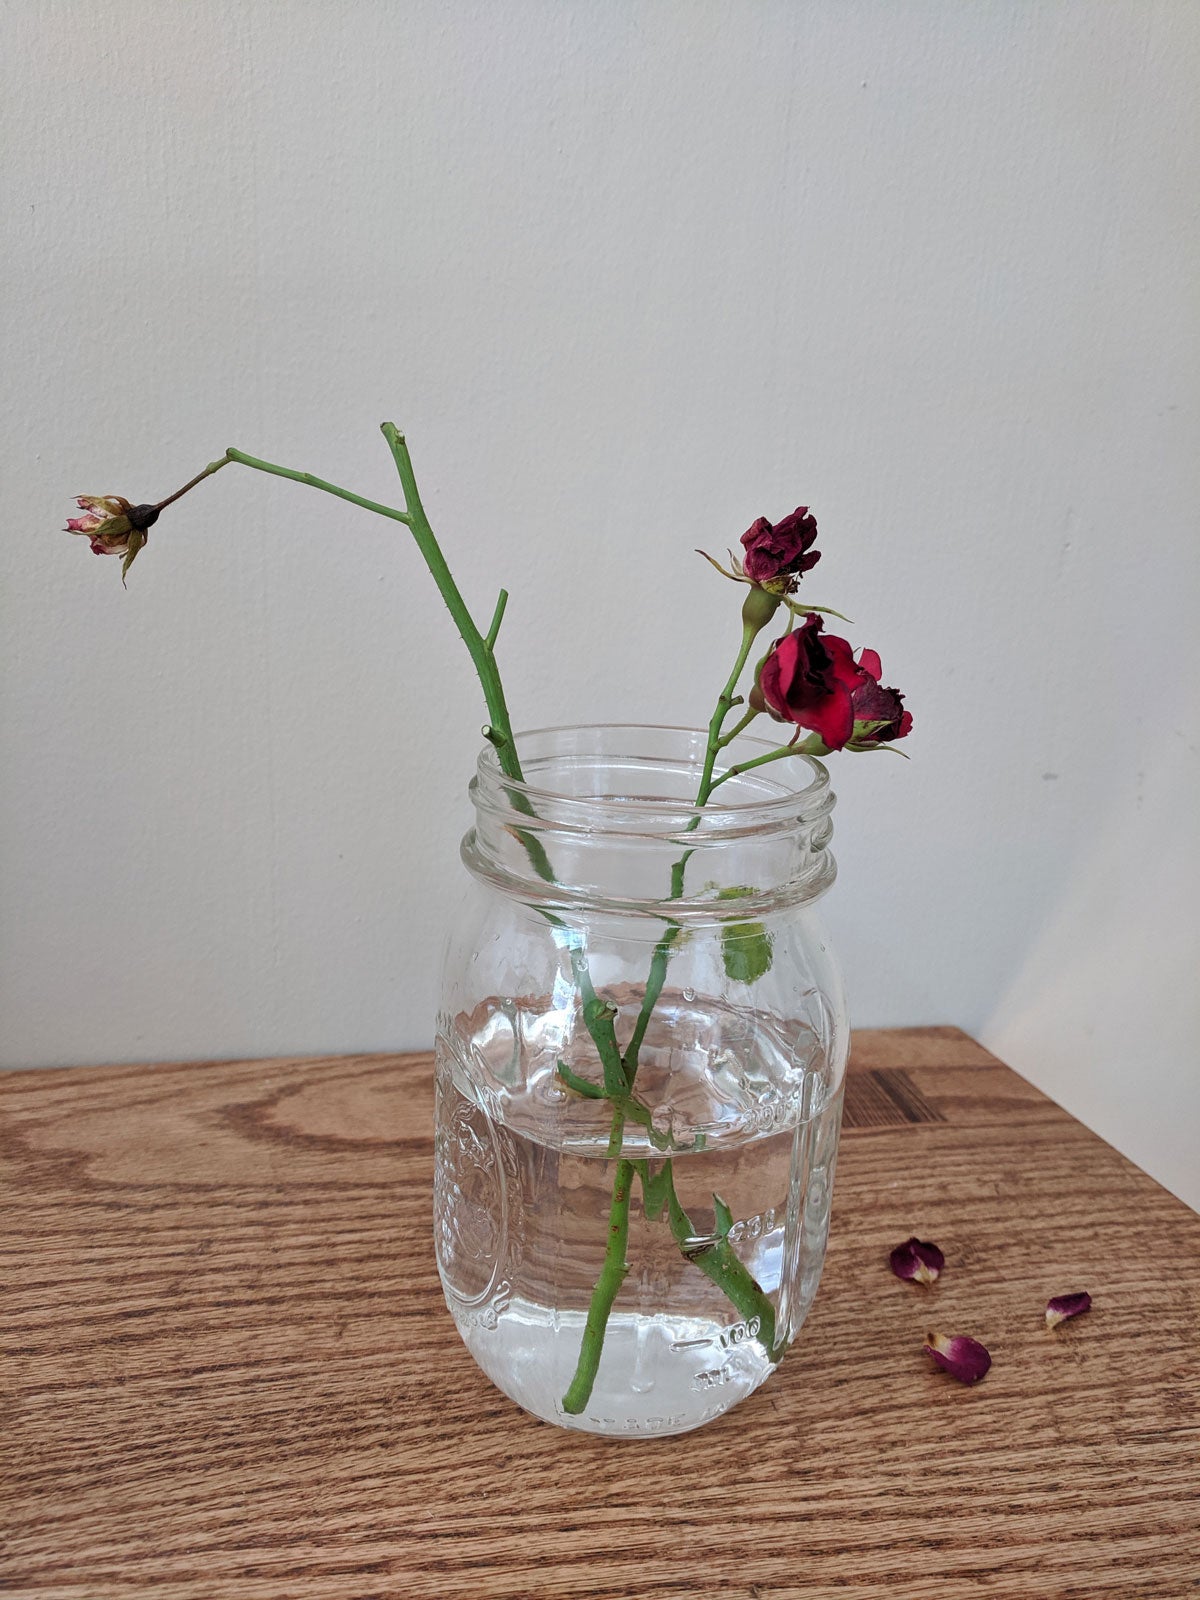 Growing Rose Cuttings In Water Tips For Propagating Roses In Water